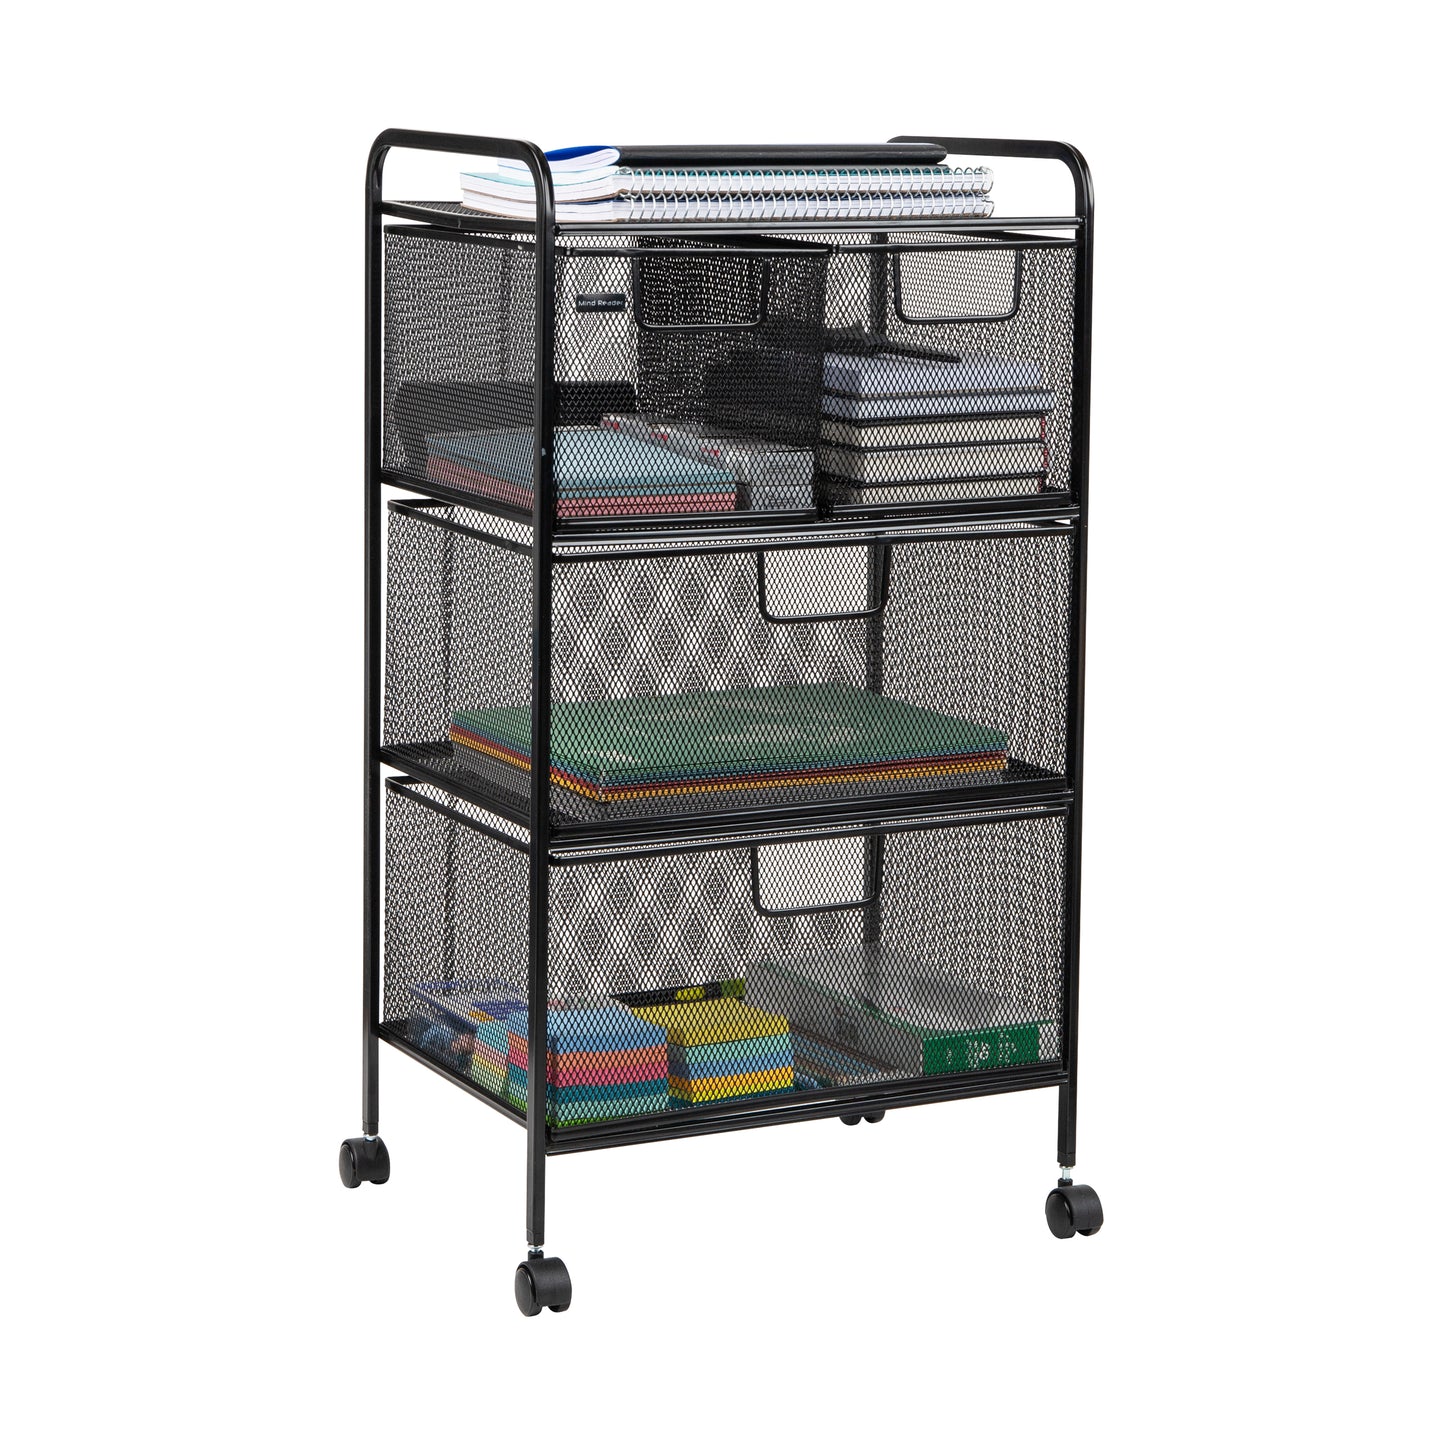 Mind Reader Network Collection, Rolling Storage Cart with 4 Removable Drawers, Utility Cart, Omnidirectional Wheels, Desk and Bathroom Organizer, Lightweight and Portable, Metal Mesh